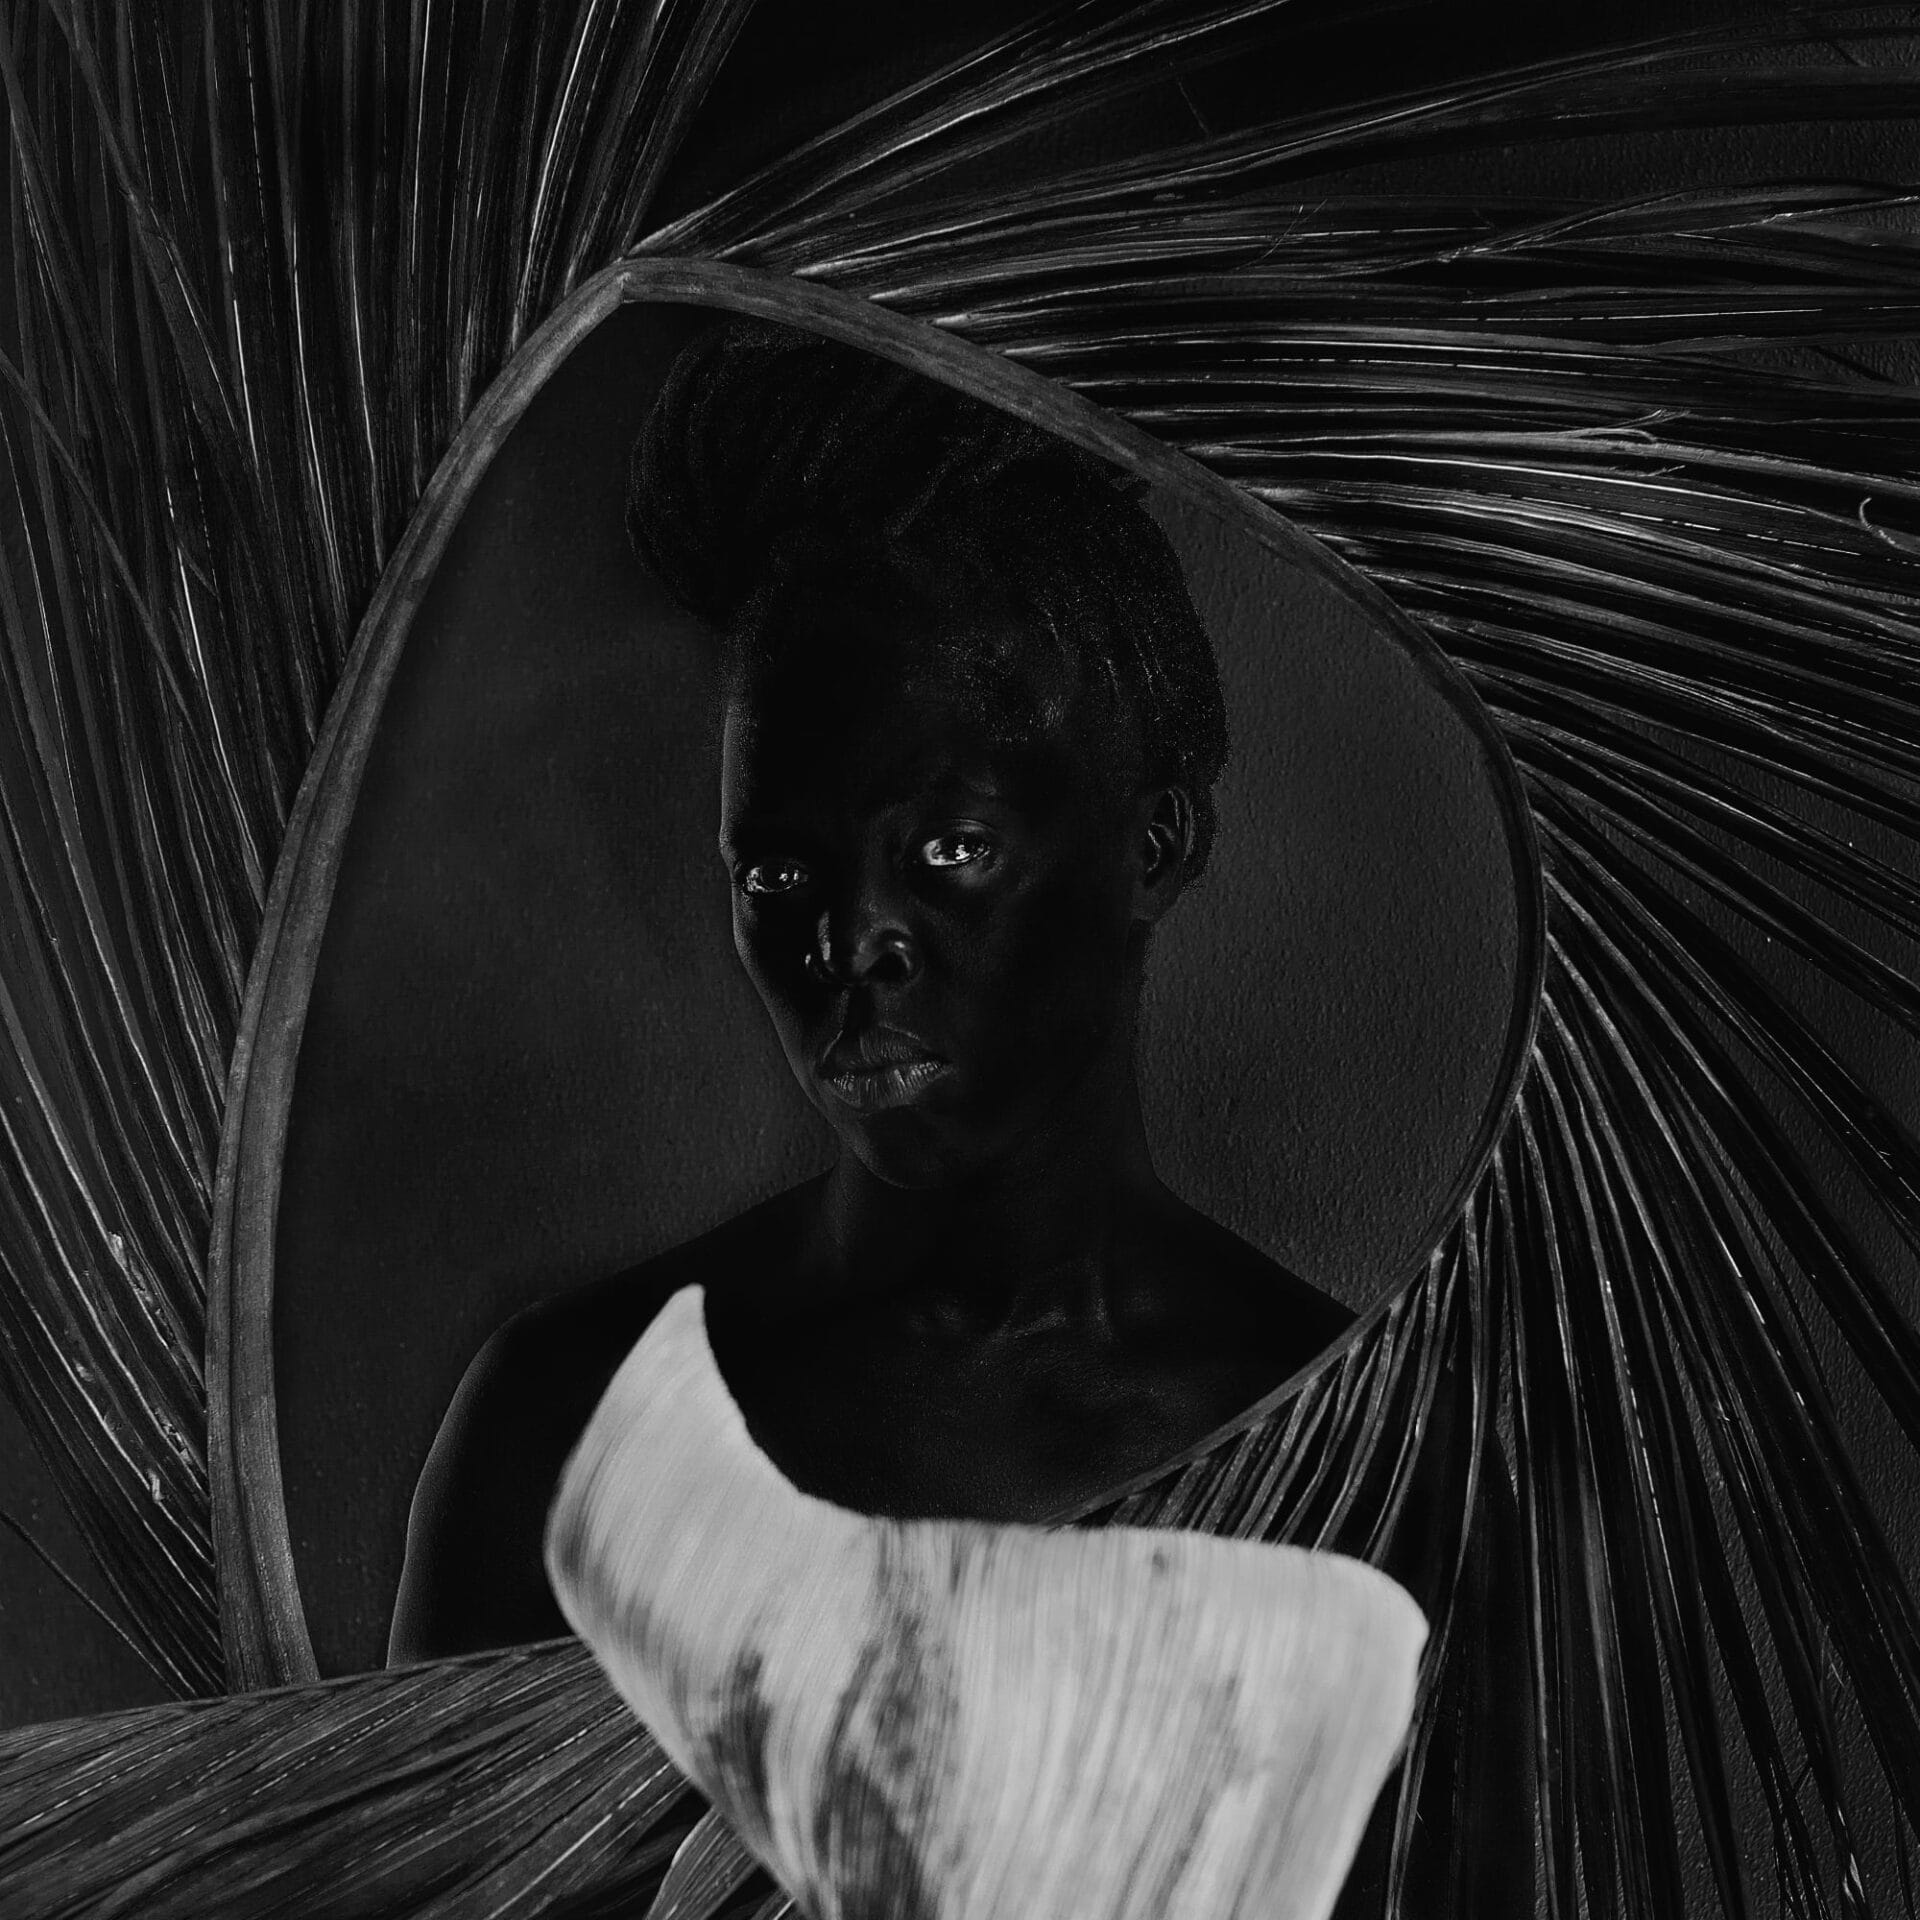 a black and white image of the artist in the middle of a circle of palm leaves